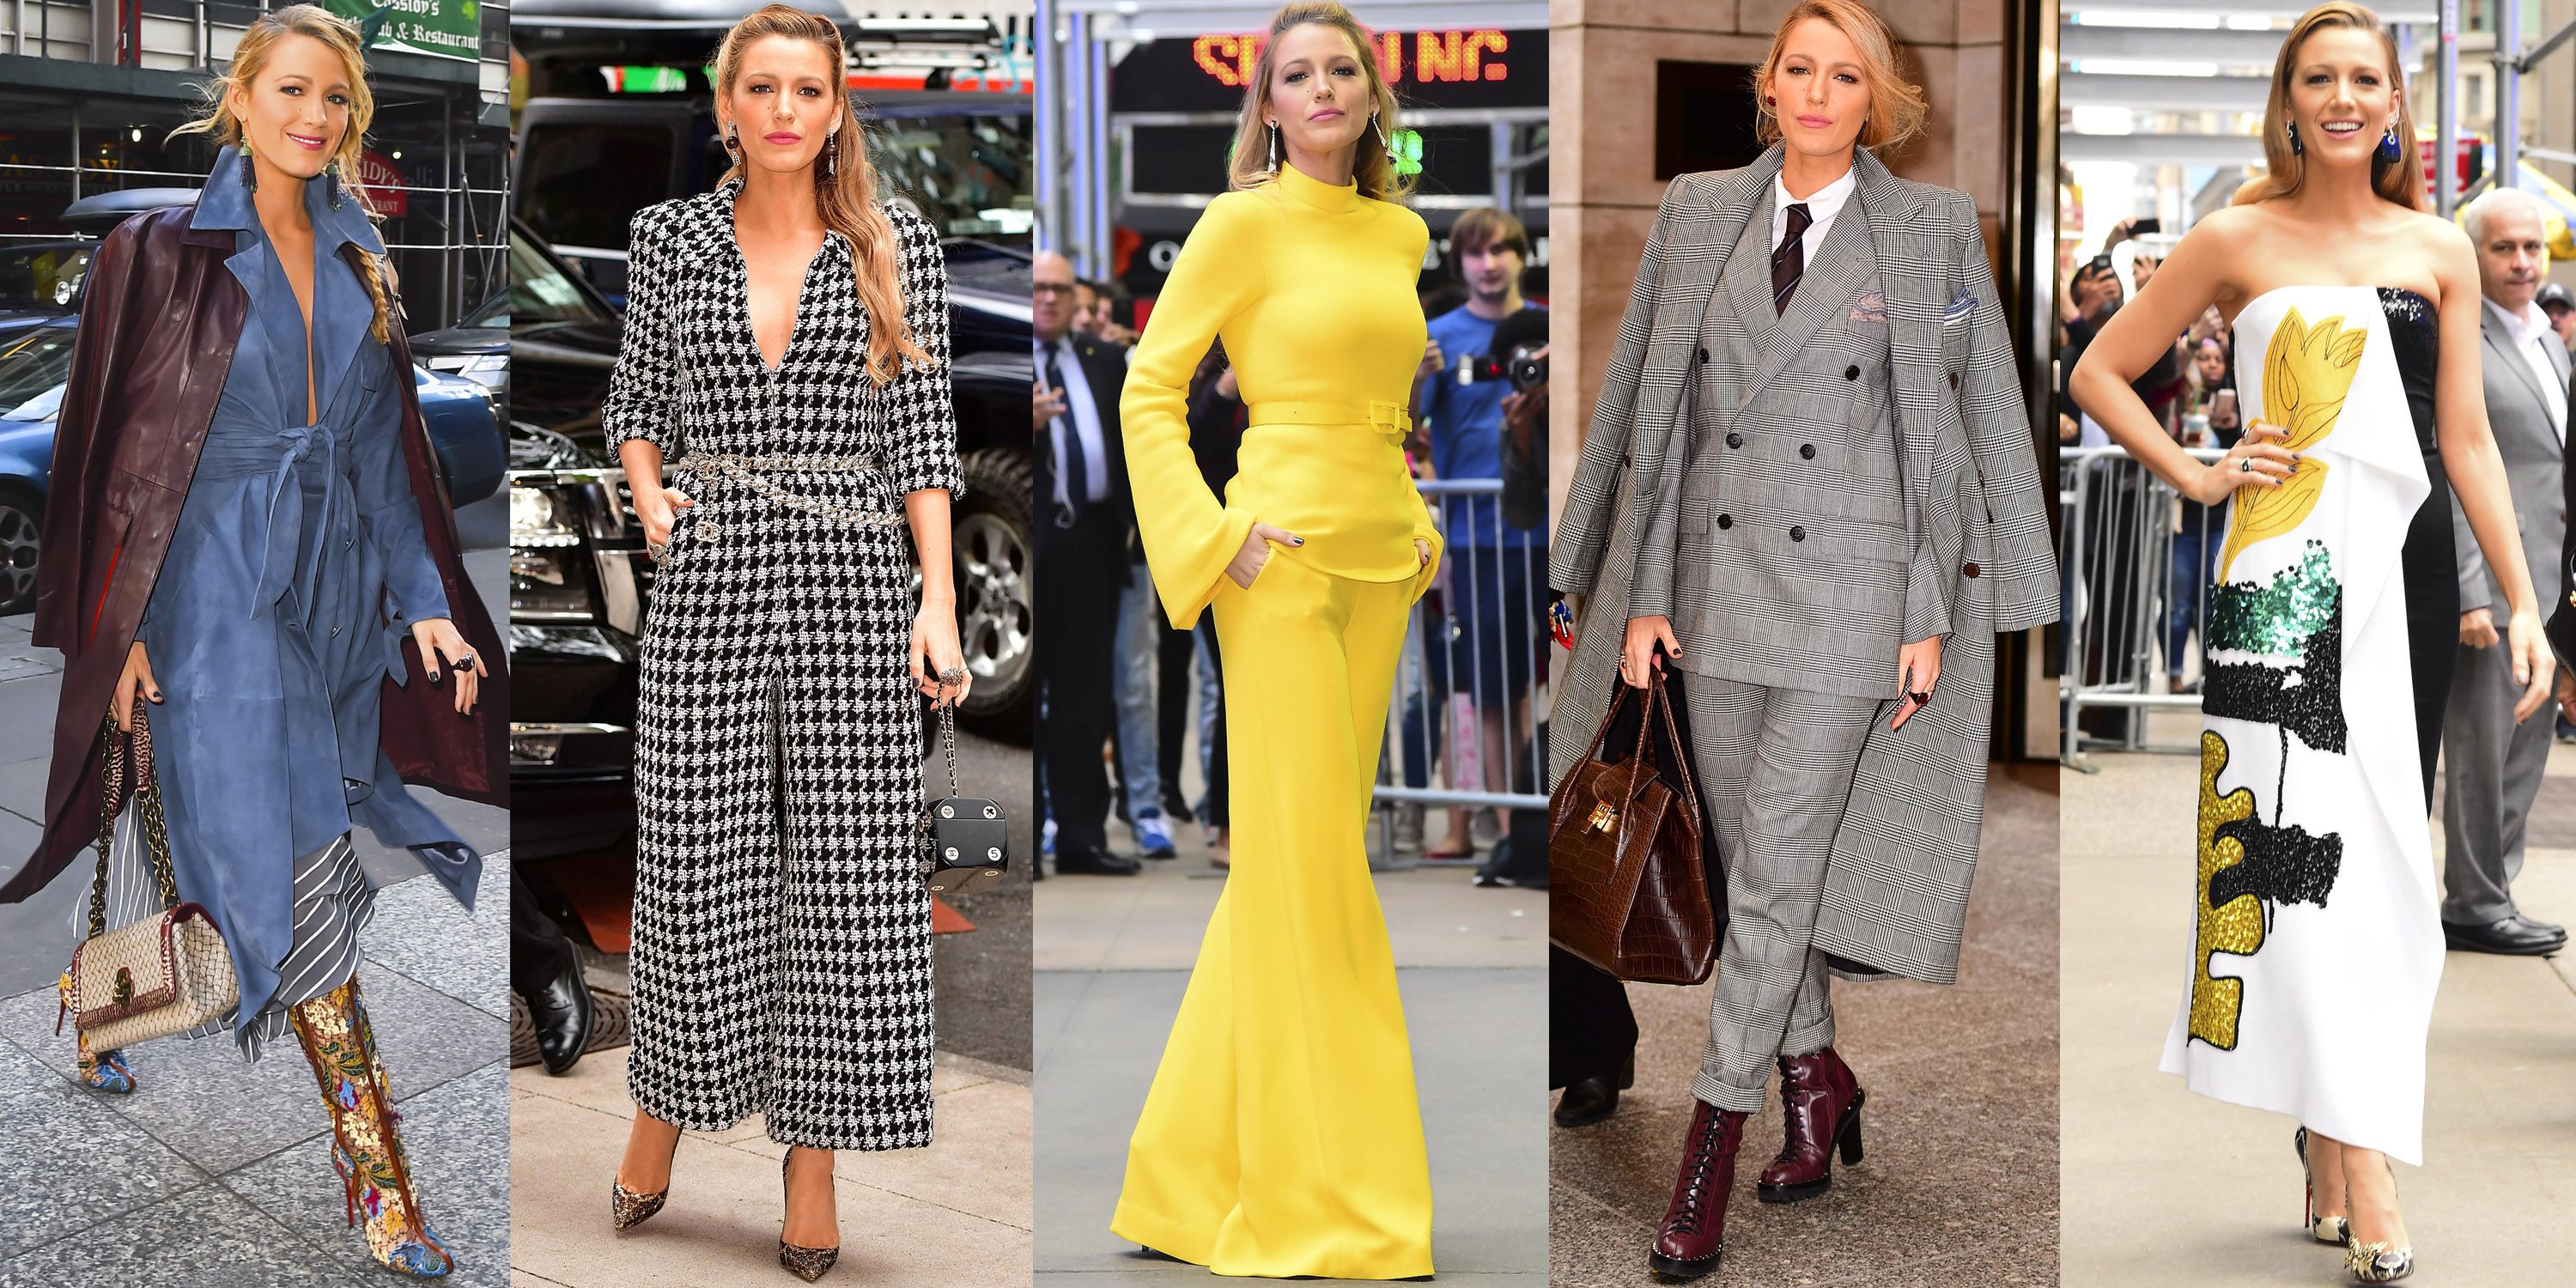 Blake Lively's Best Street Style Fashion Ever